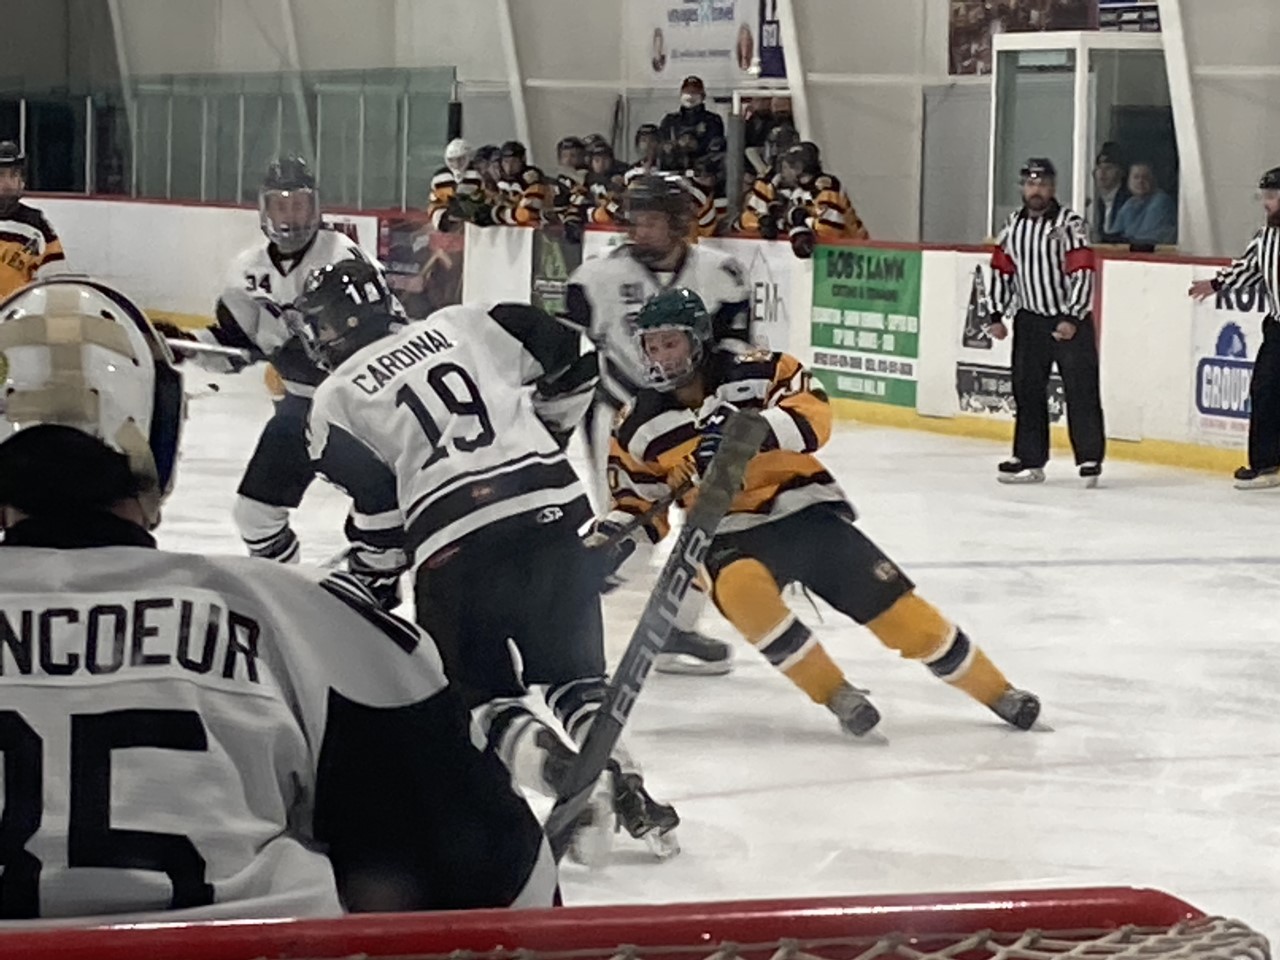 Cougars-Volant series tied 1-1